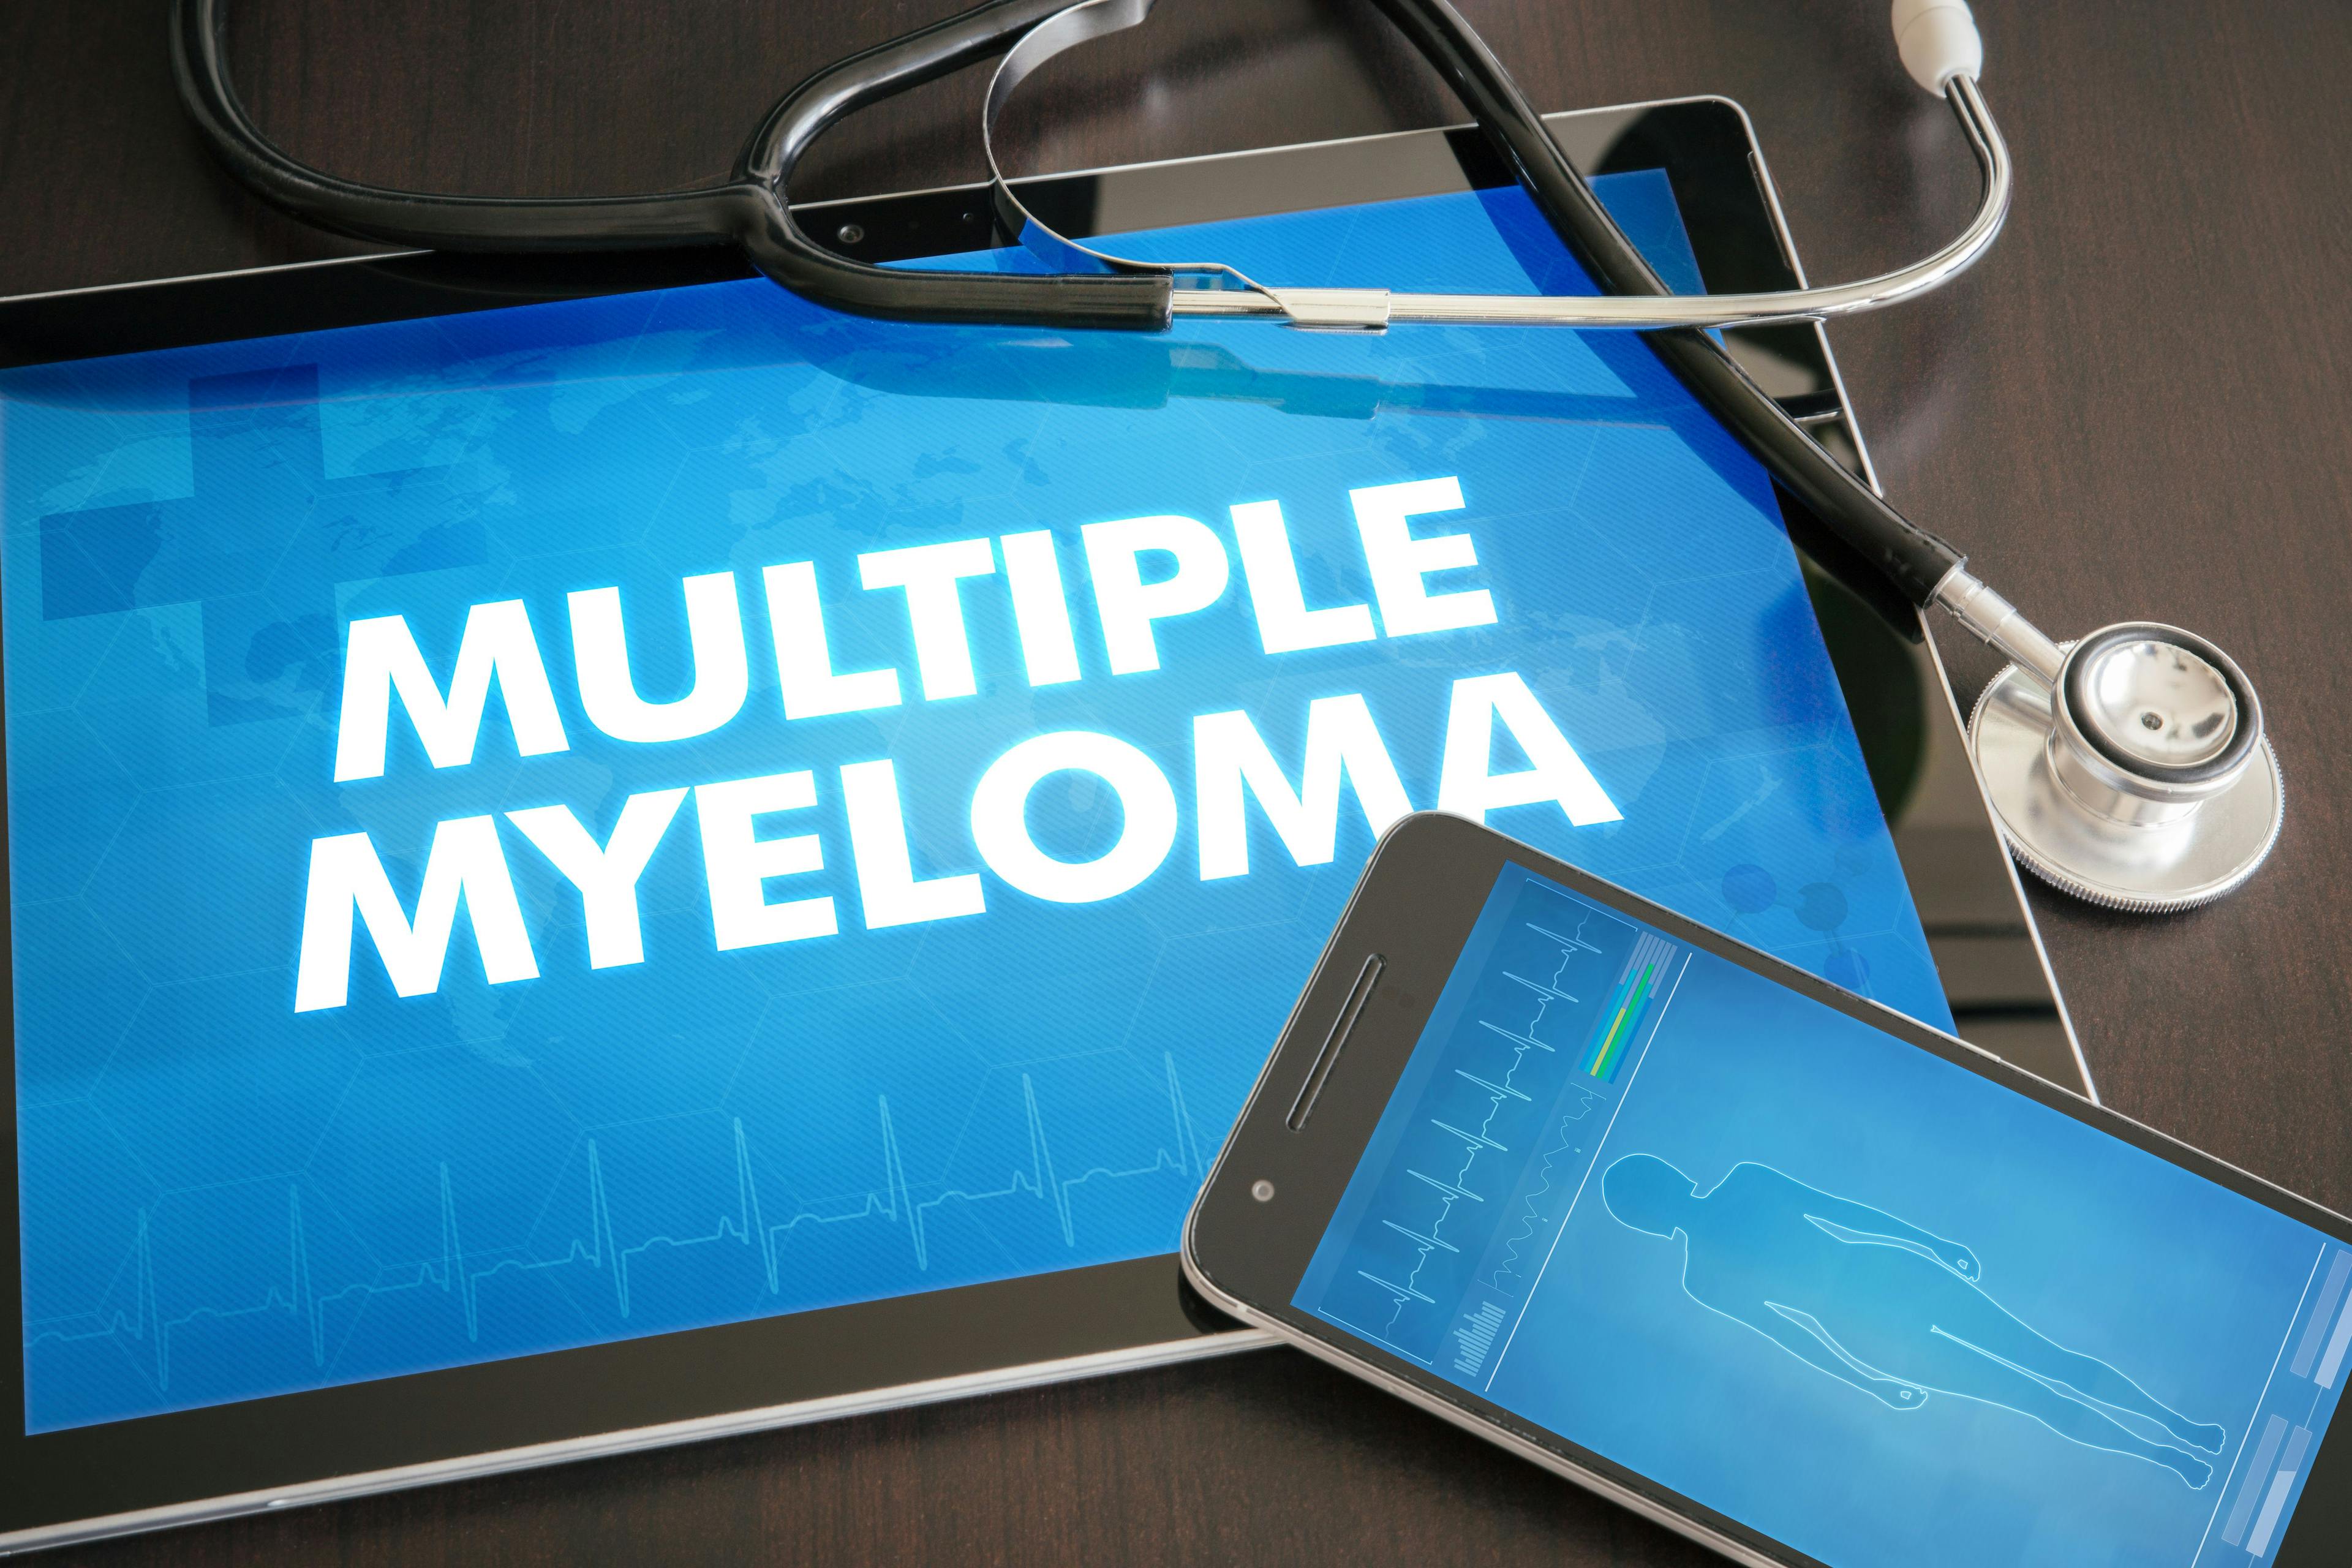 Image credit: ibreakstock | stock.adobe.com. Multiple myeloma (cancer type) diagnosis medical concept on tablet screen with stethoscope